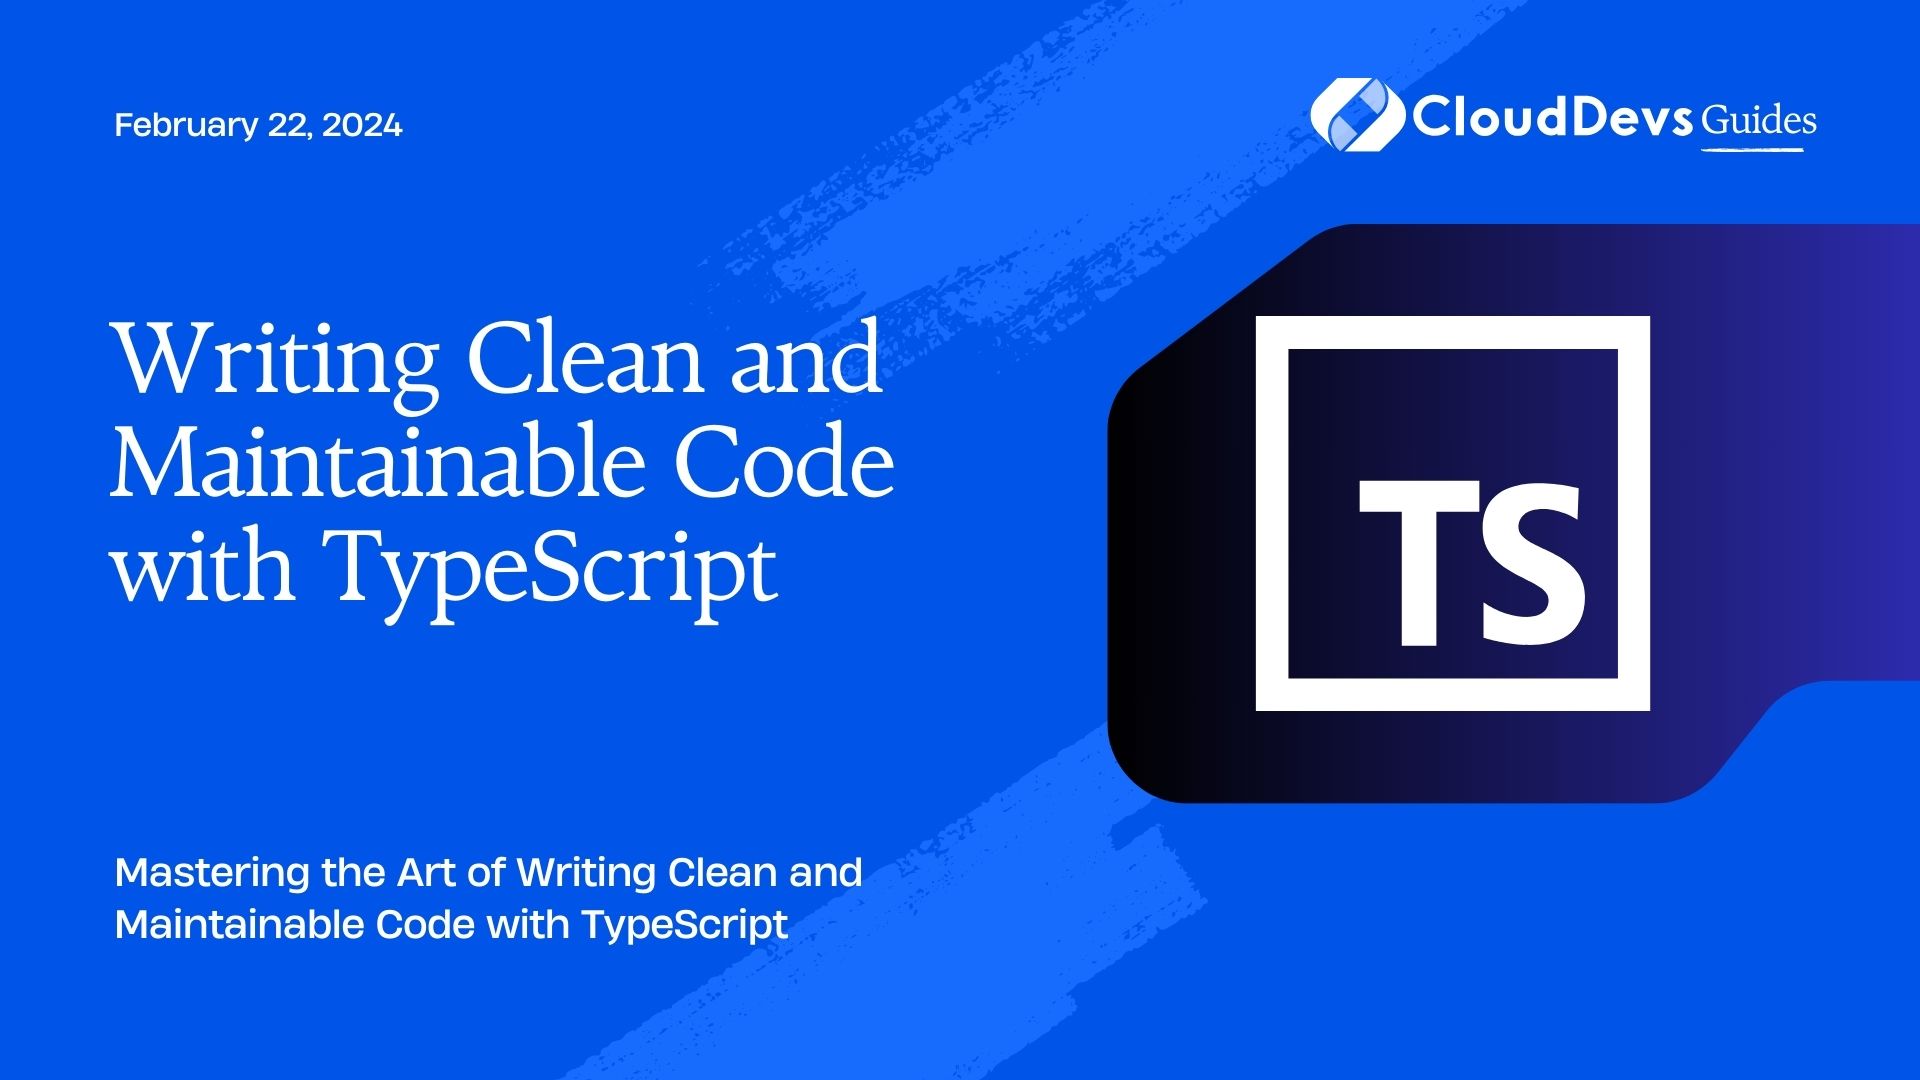 Writing Clean and Maintainable Code with TypeScript